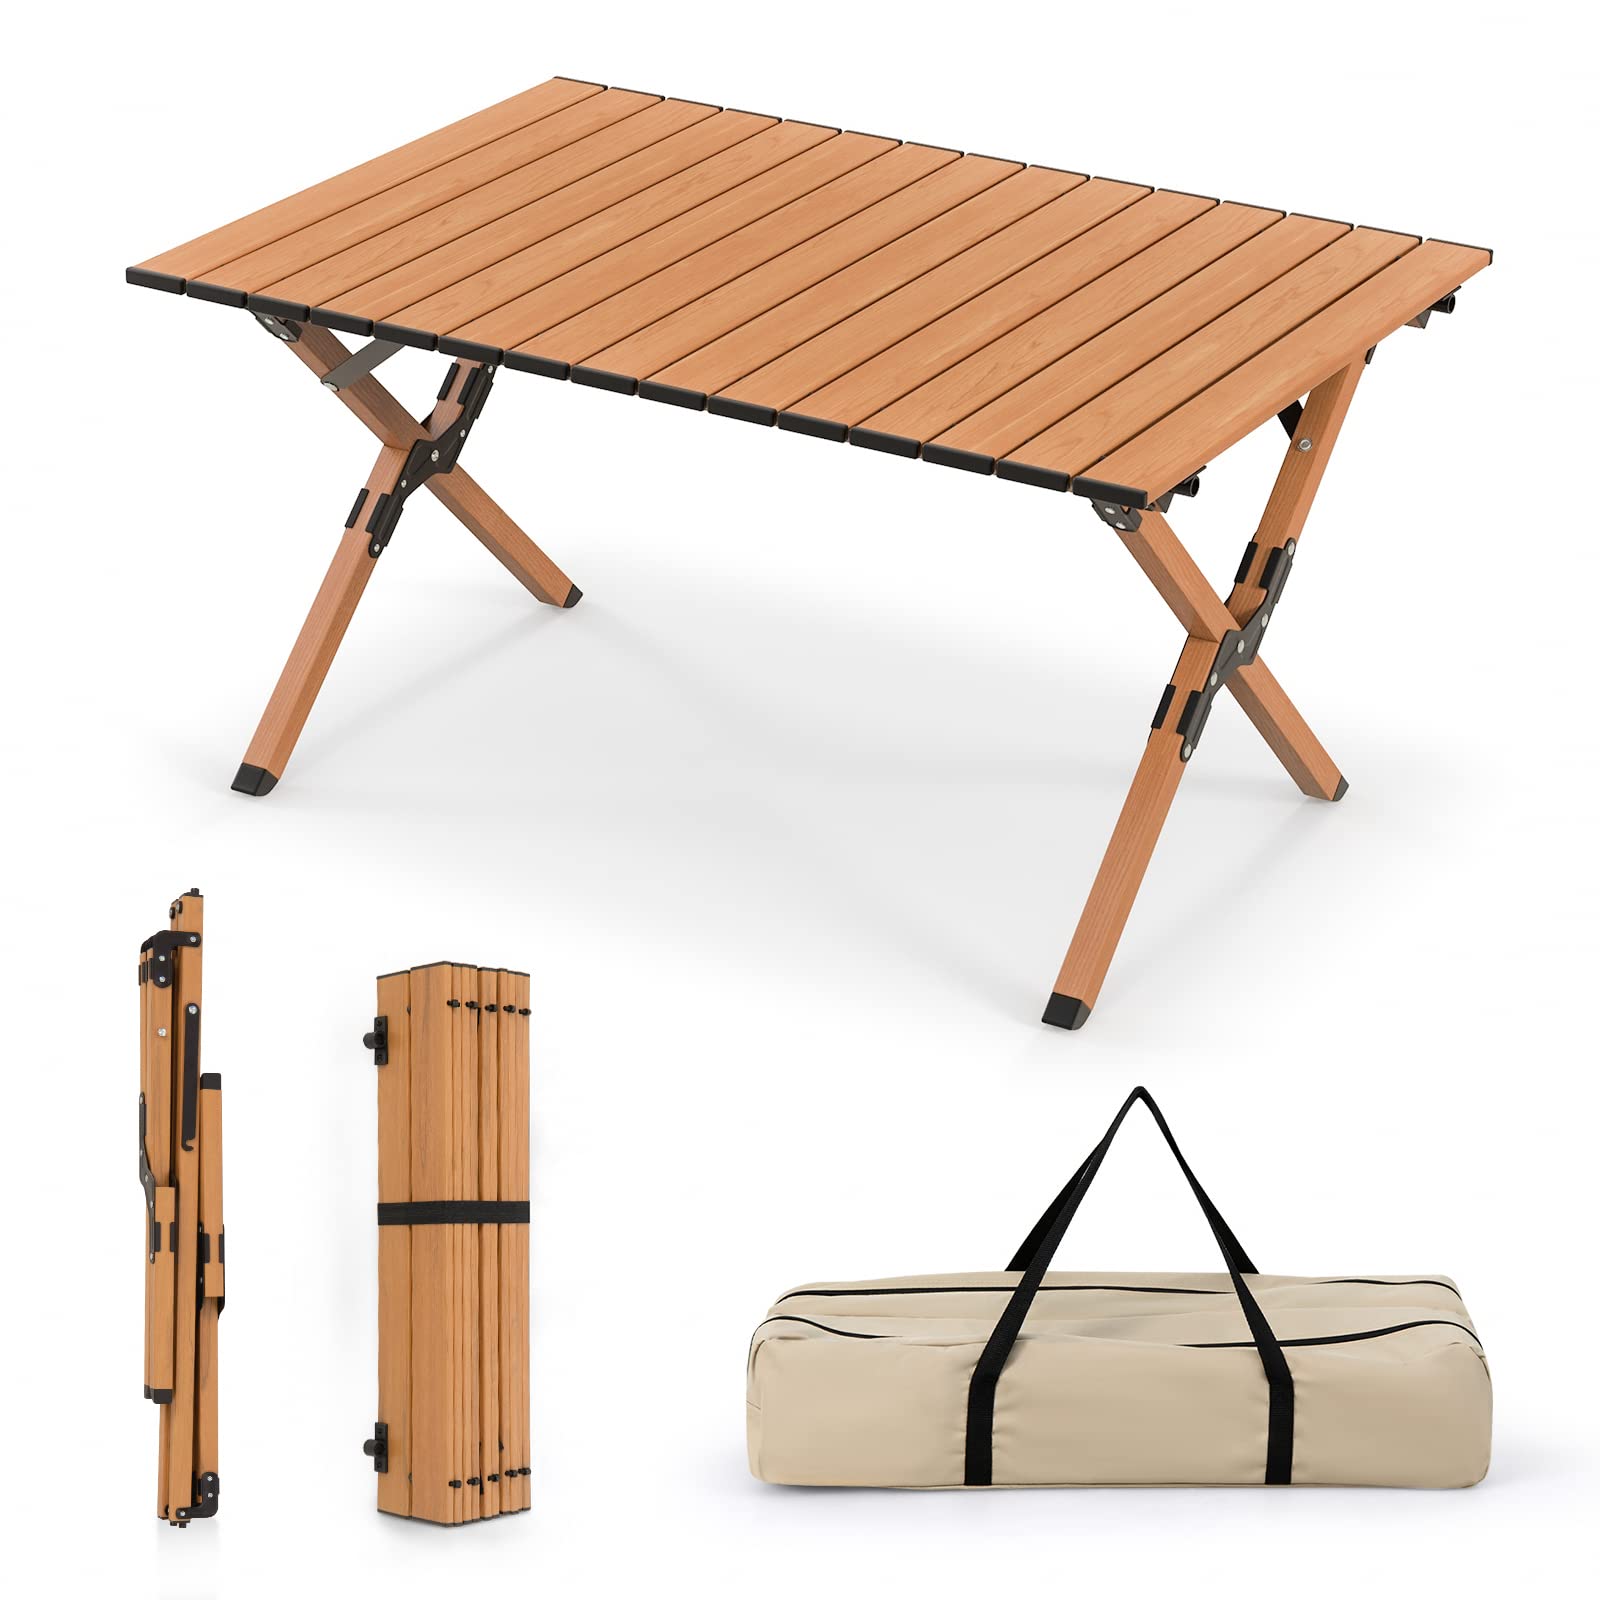 Giantex Folding Camping Table, Roll-Up Folding Table w/Carry Bag